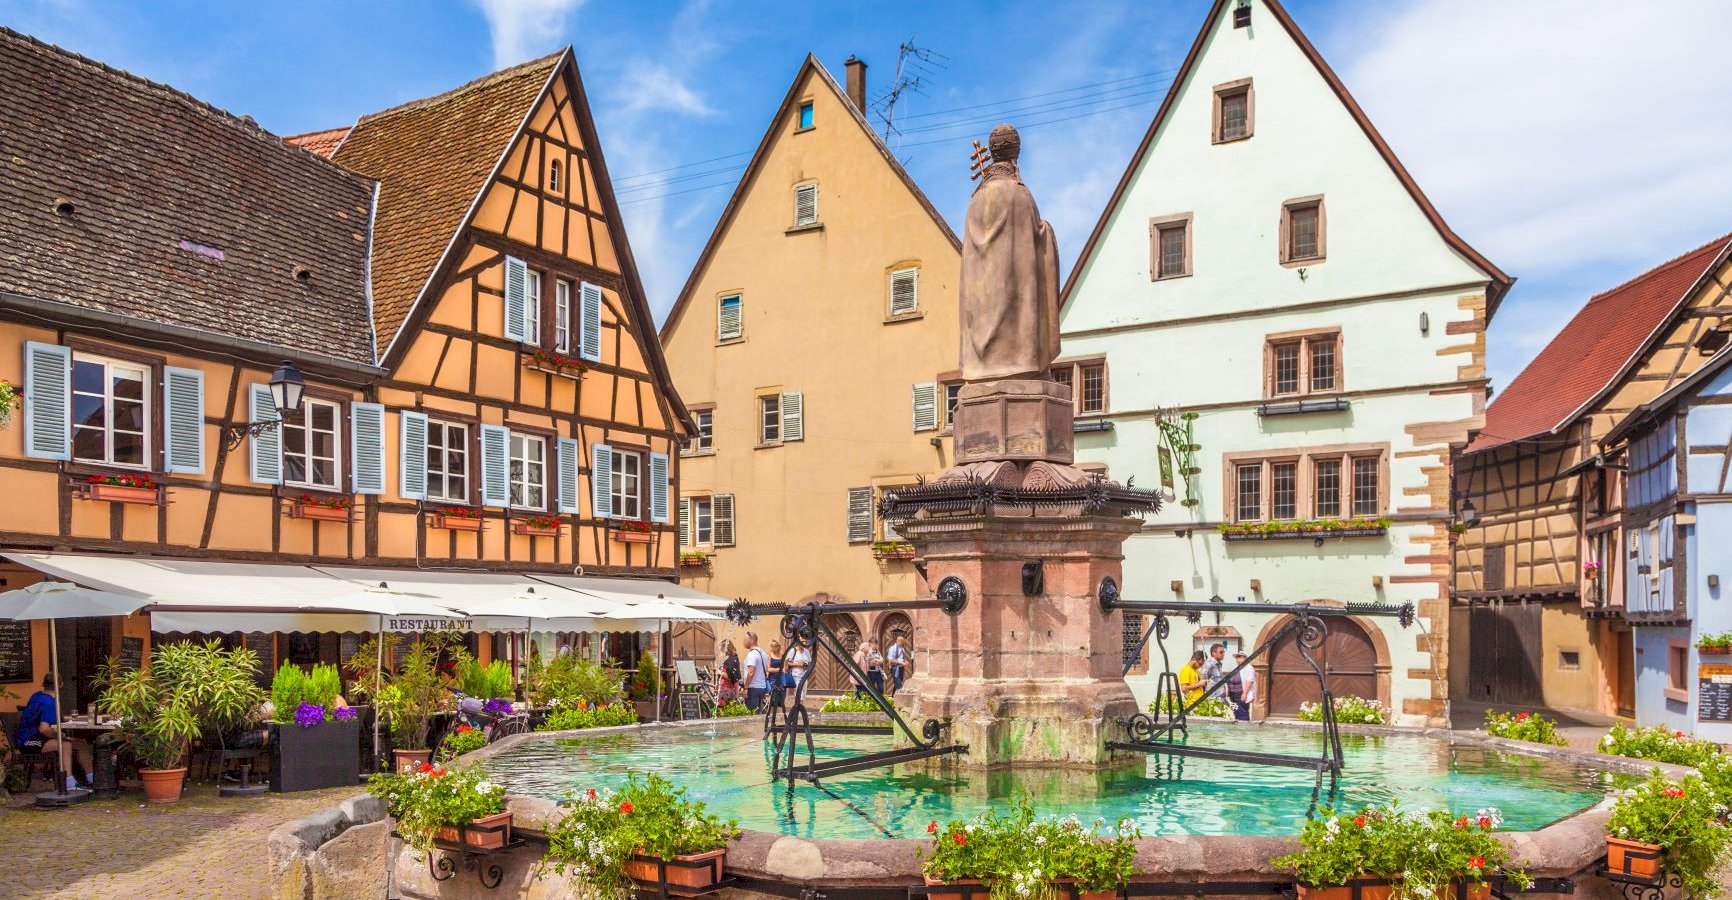 Ophorus Tours - 4 Days Small Group Alsace Travel Package - Strasbourg - 4* Hotel